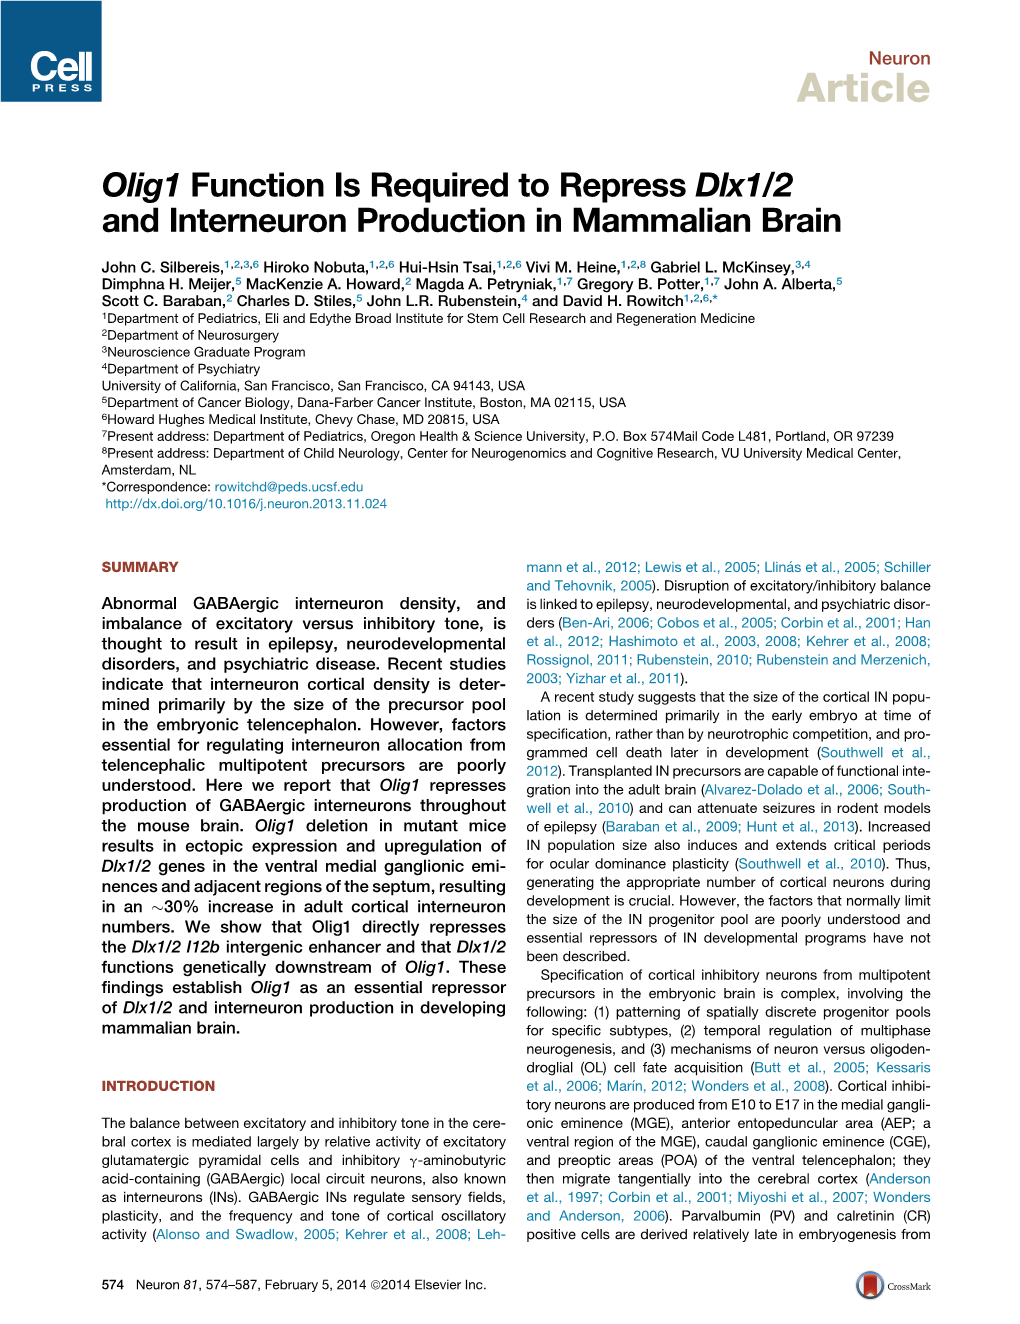 Olig1 Function Is Required to Repress Dlx1/2 and Interneuron Production in Mammalian Brain